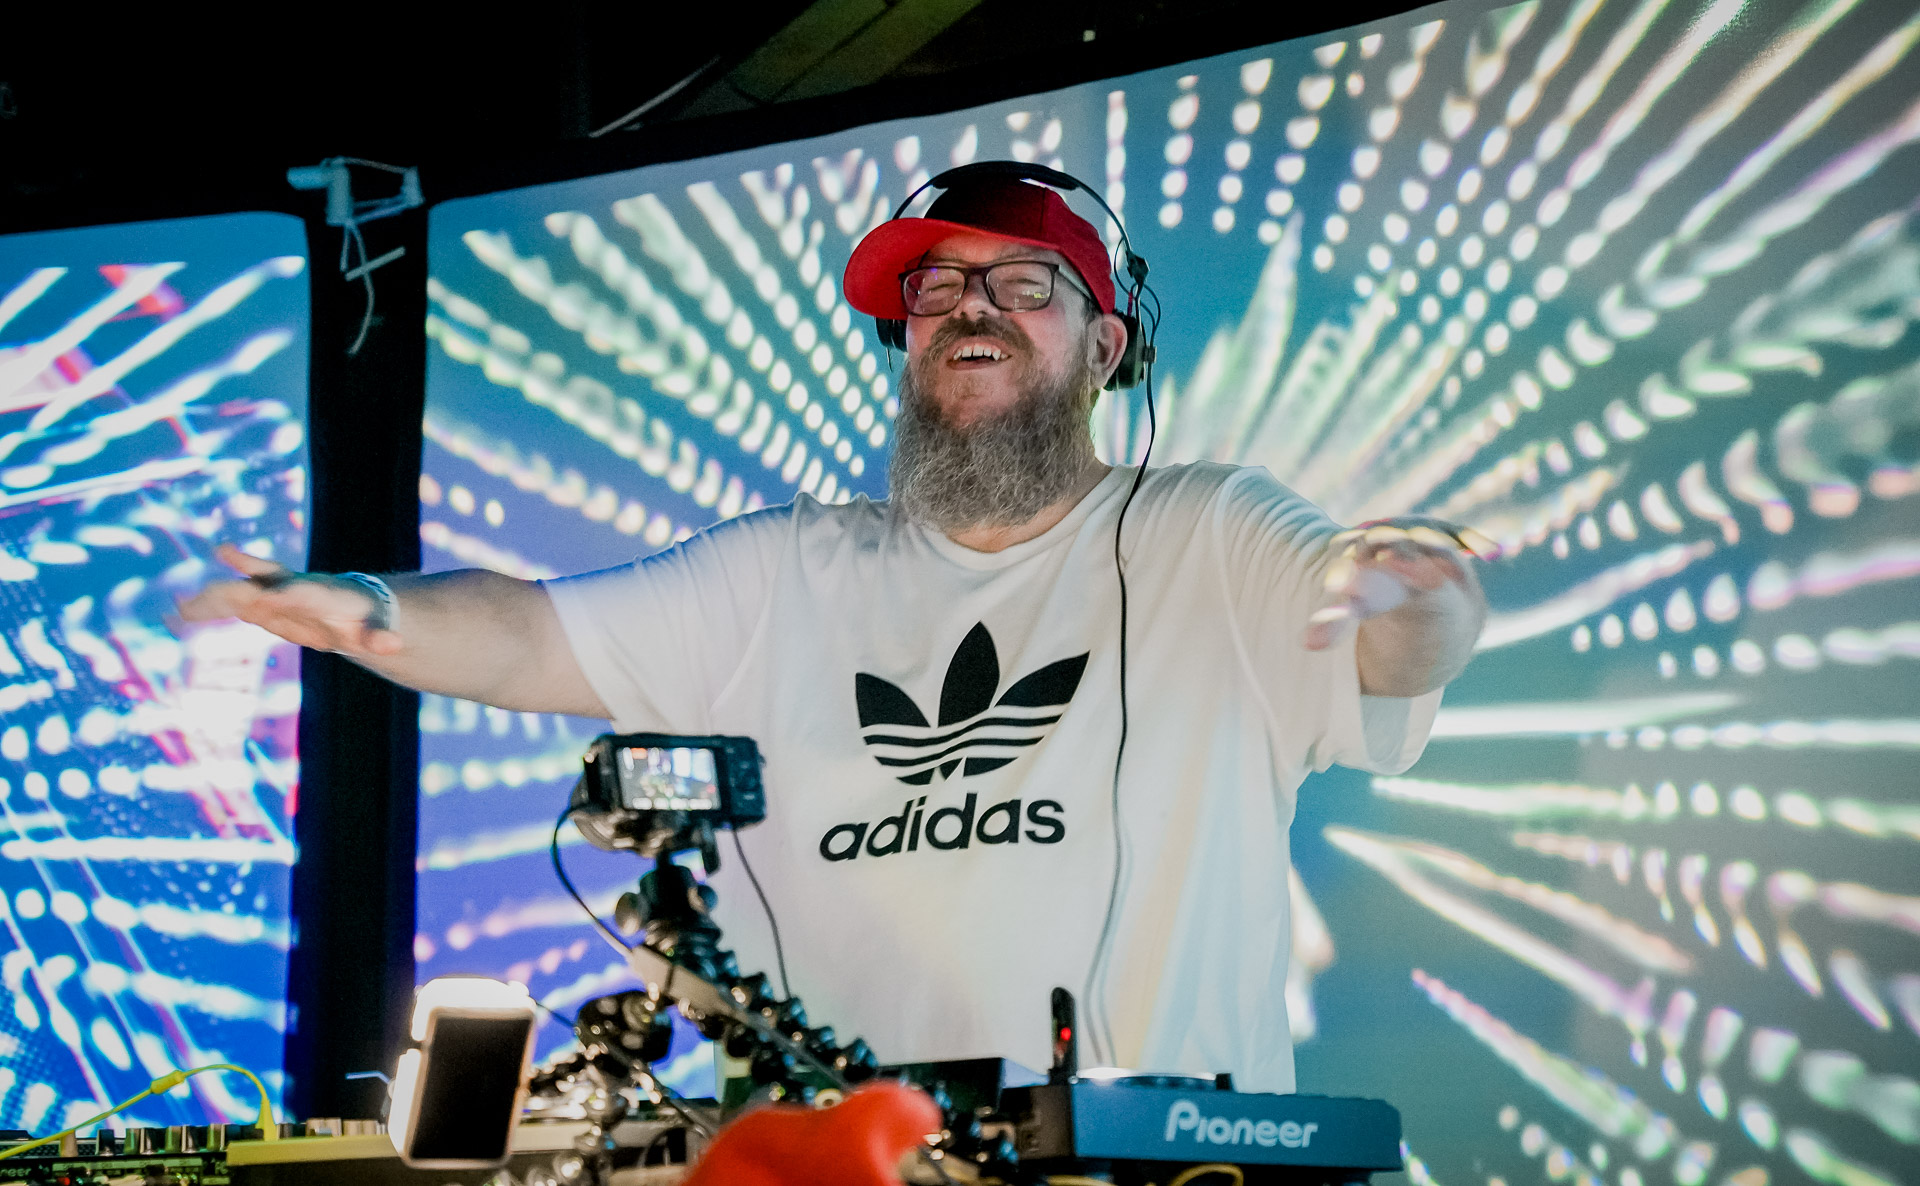 A dj smiling with his hands up